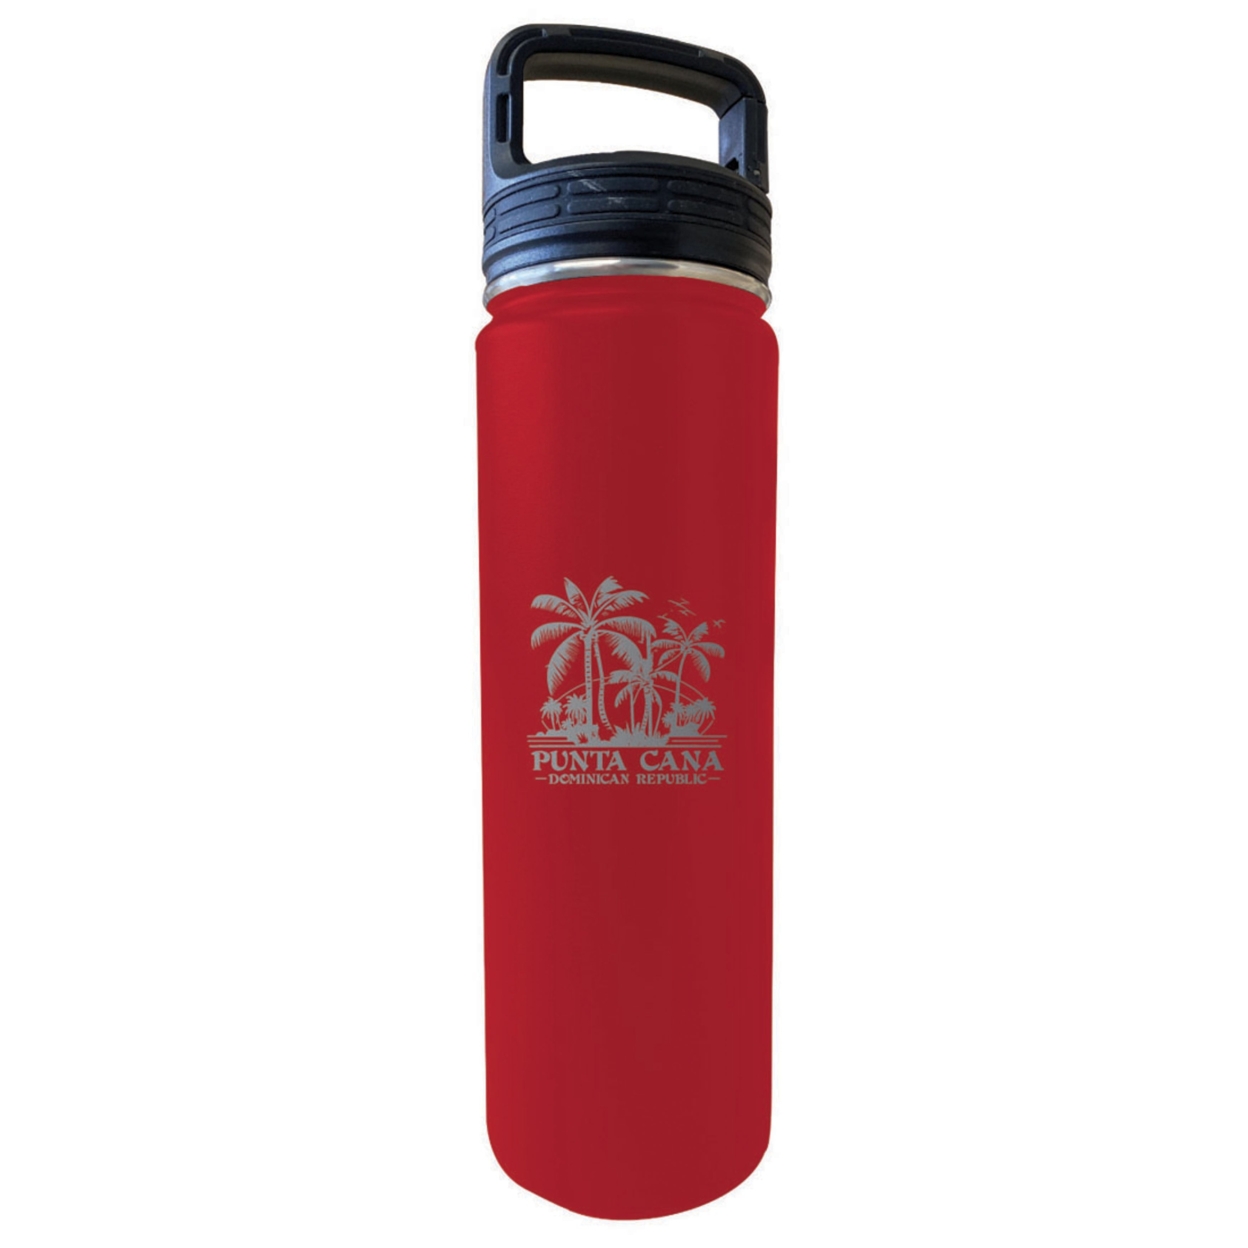 Punta Cana Dominican Republic Souvenir 32 Oz Insulated Stainless Steel Tumbler - Black, Parrot 2